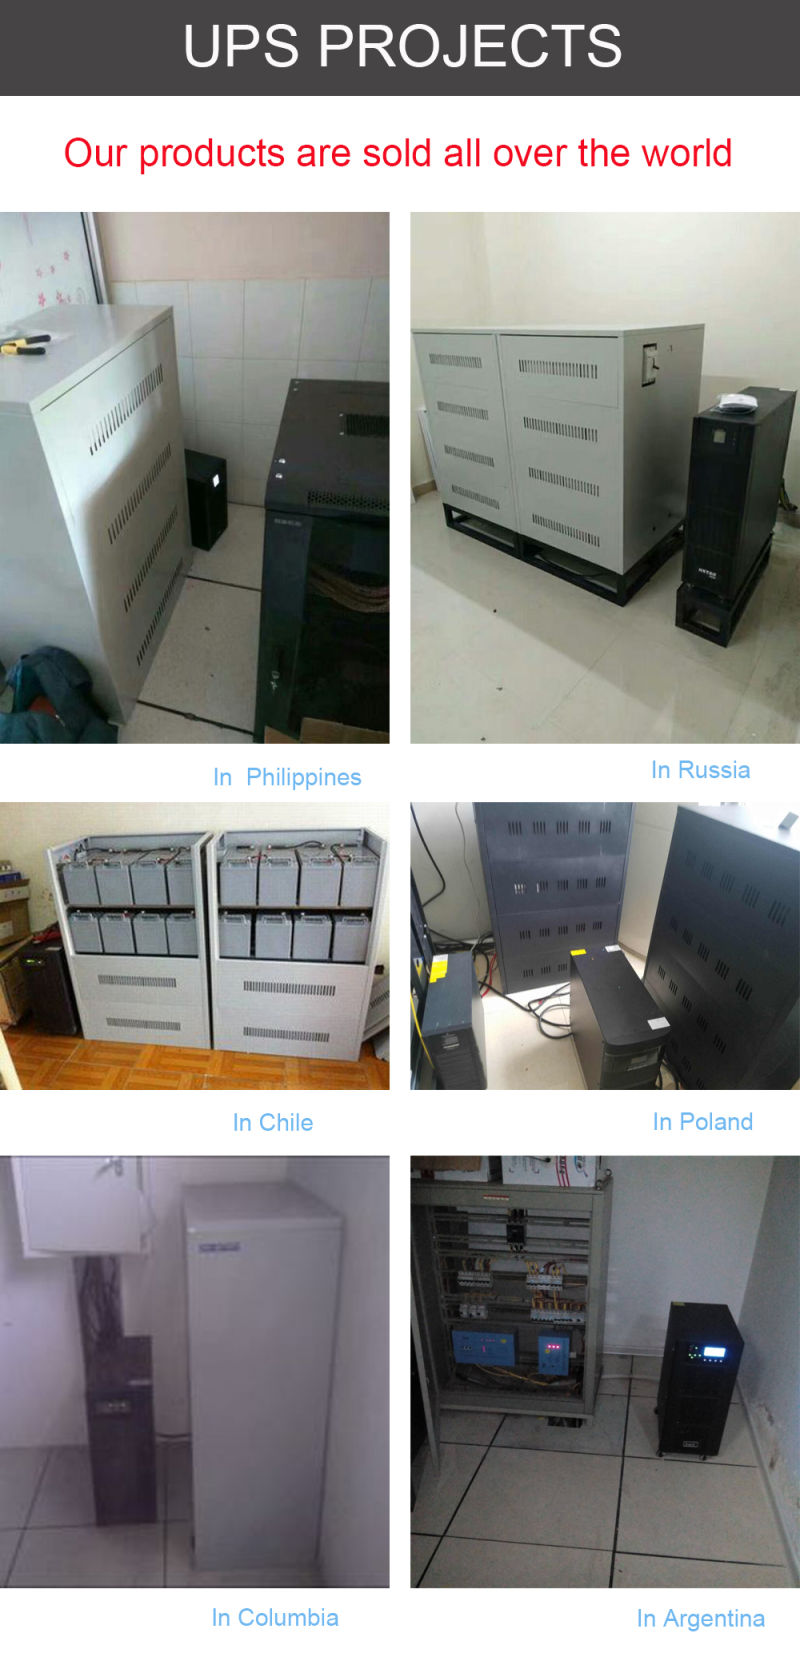 Ta2kVA Low Frequency Online UPS for PLC System Control Center